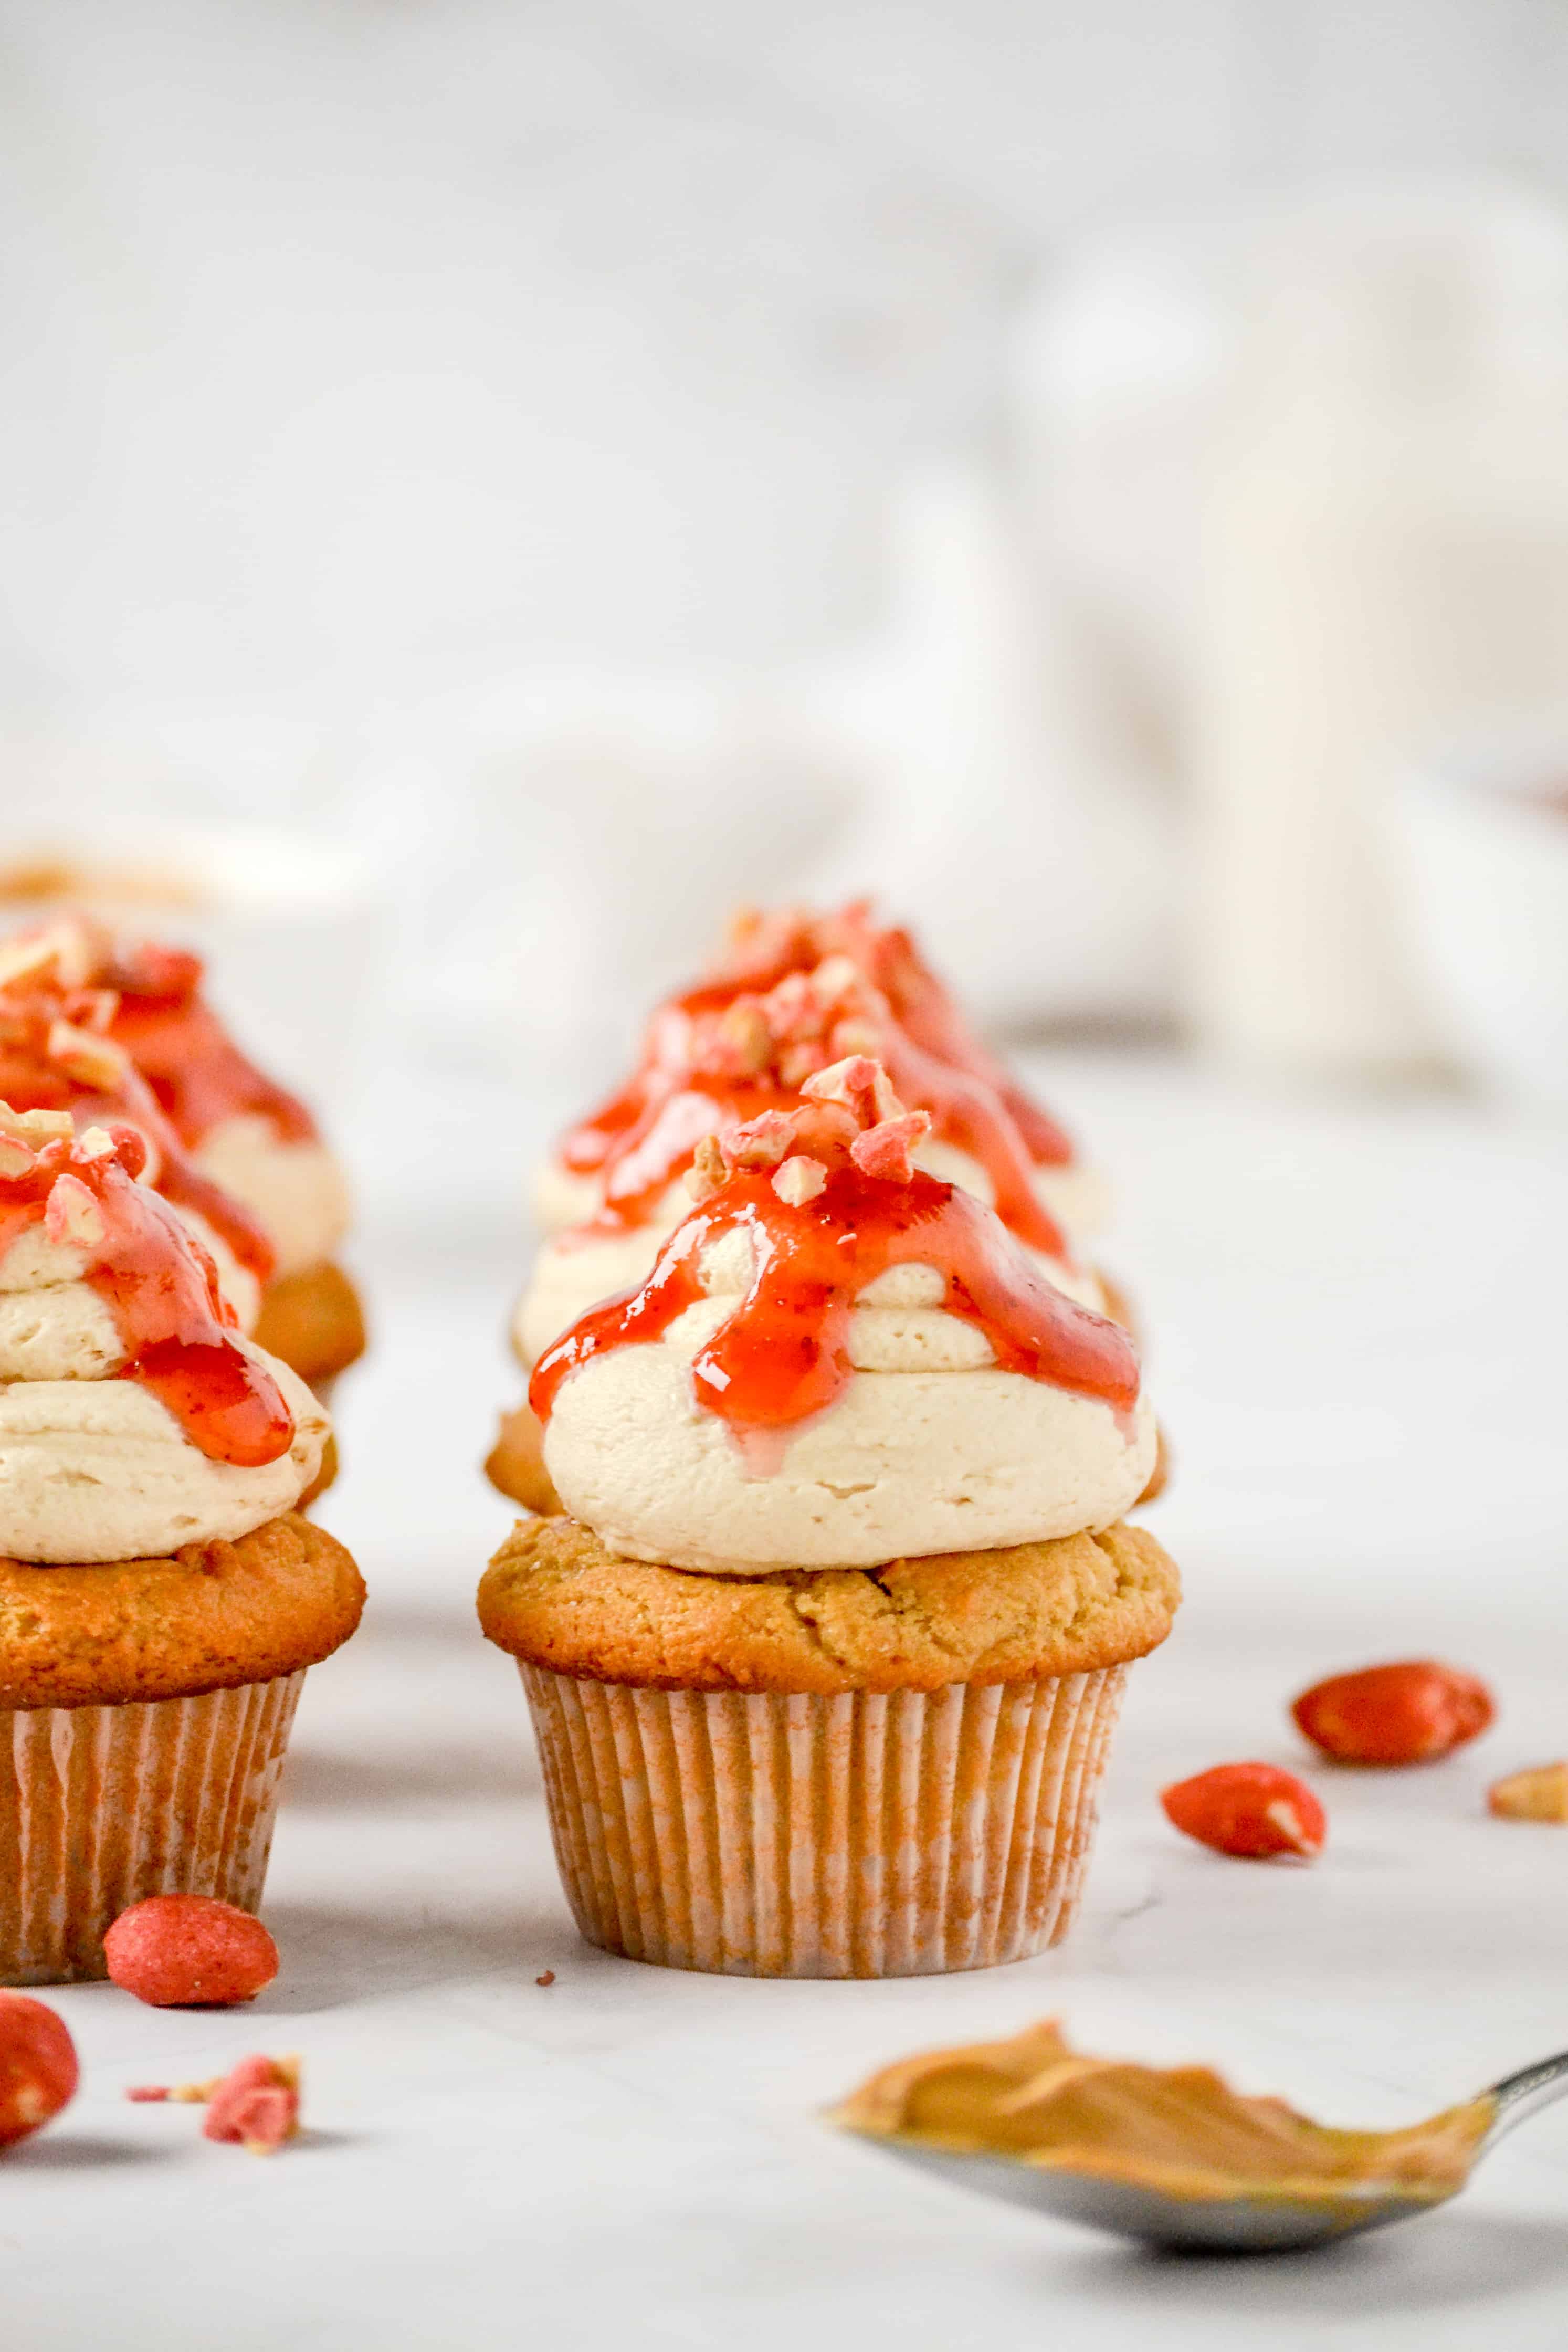 PEANUT BUTTER AND JELLY CUPCAKES